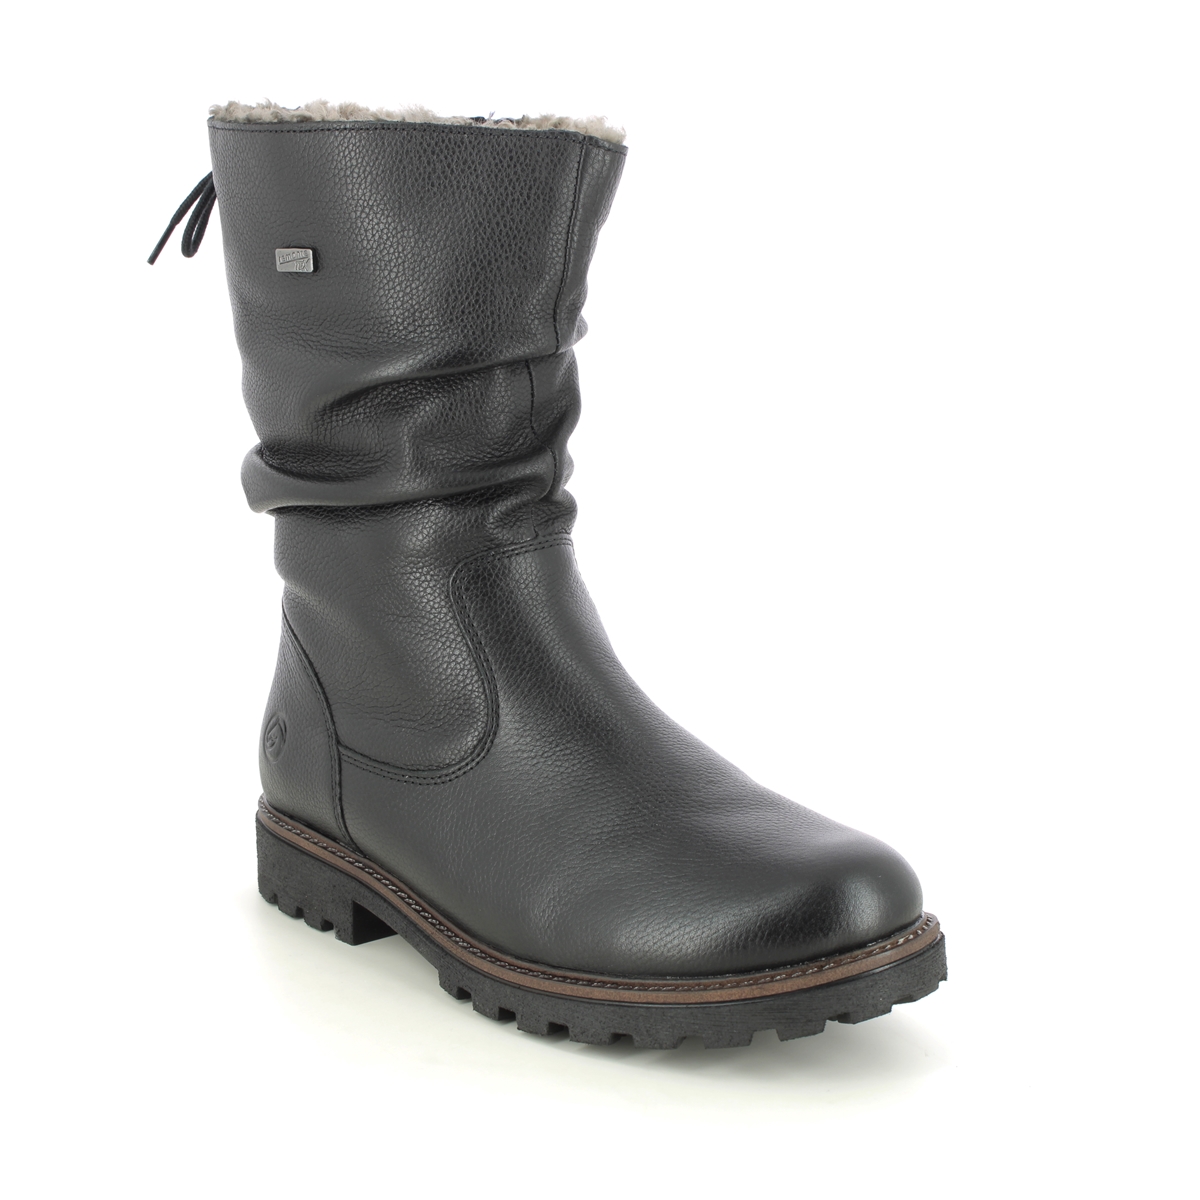 Remonte Brand Tex Sheep Black Leather Womens Mid Calf Boots D8477-01 In Size 41 In Plain Black Leather